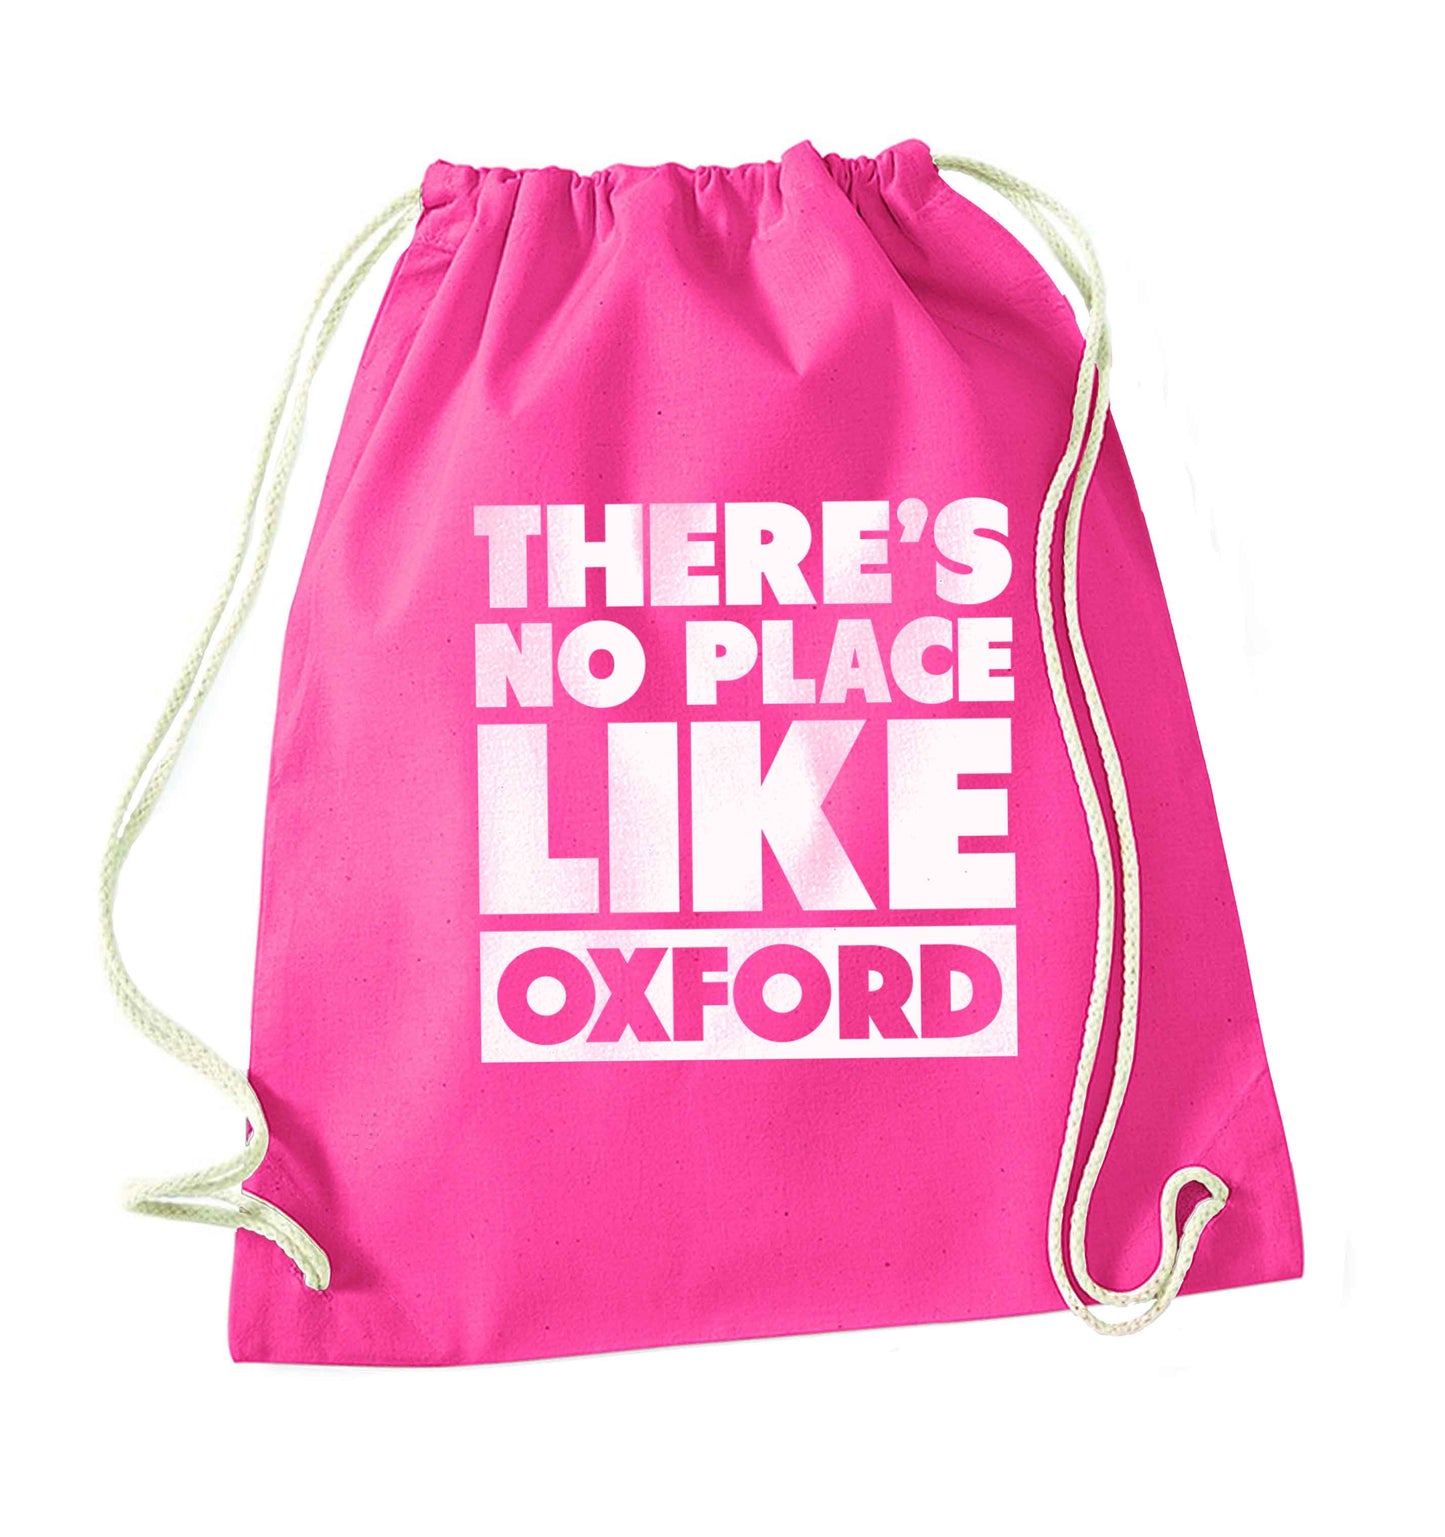 There's no place like Oxford pink drawstring bag